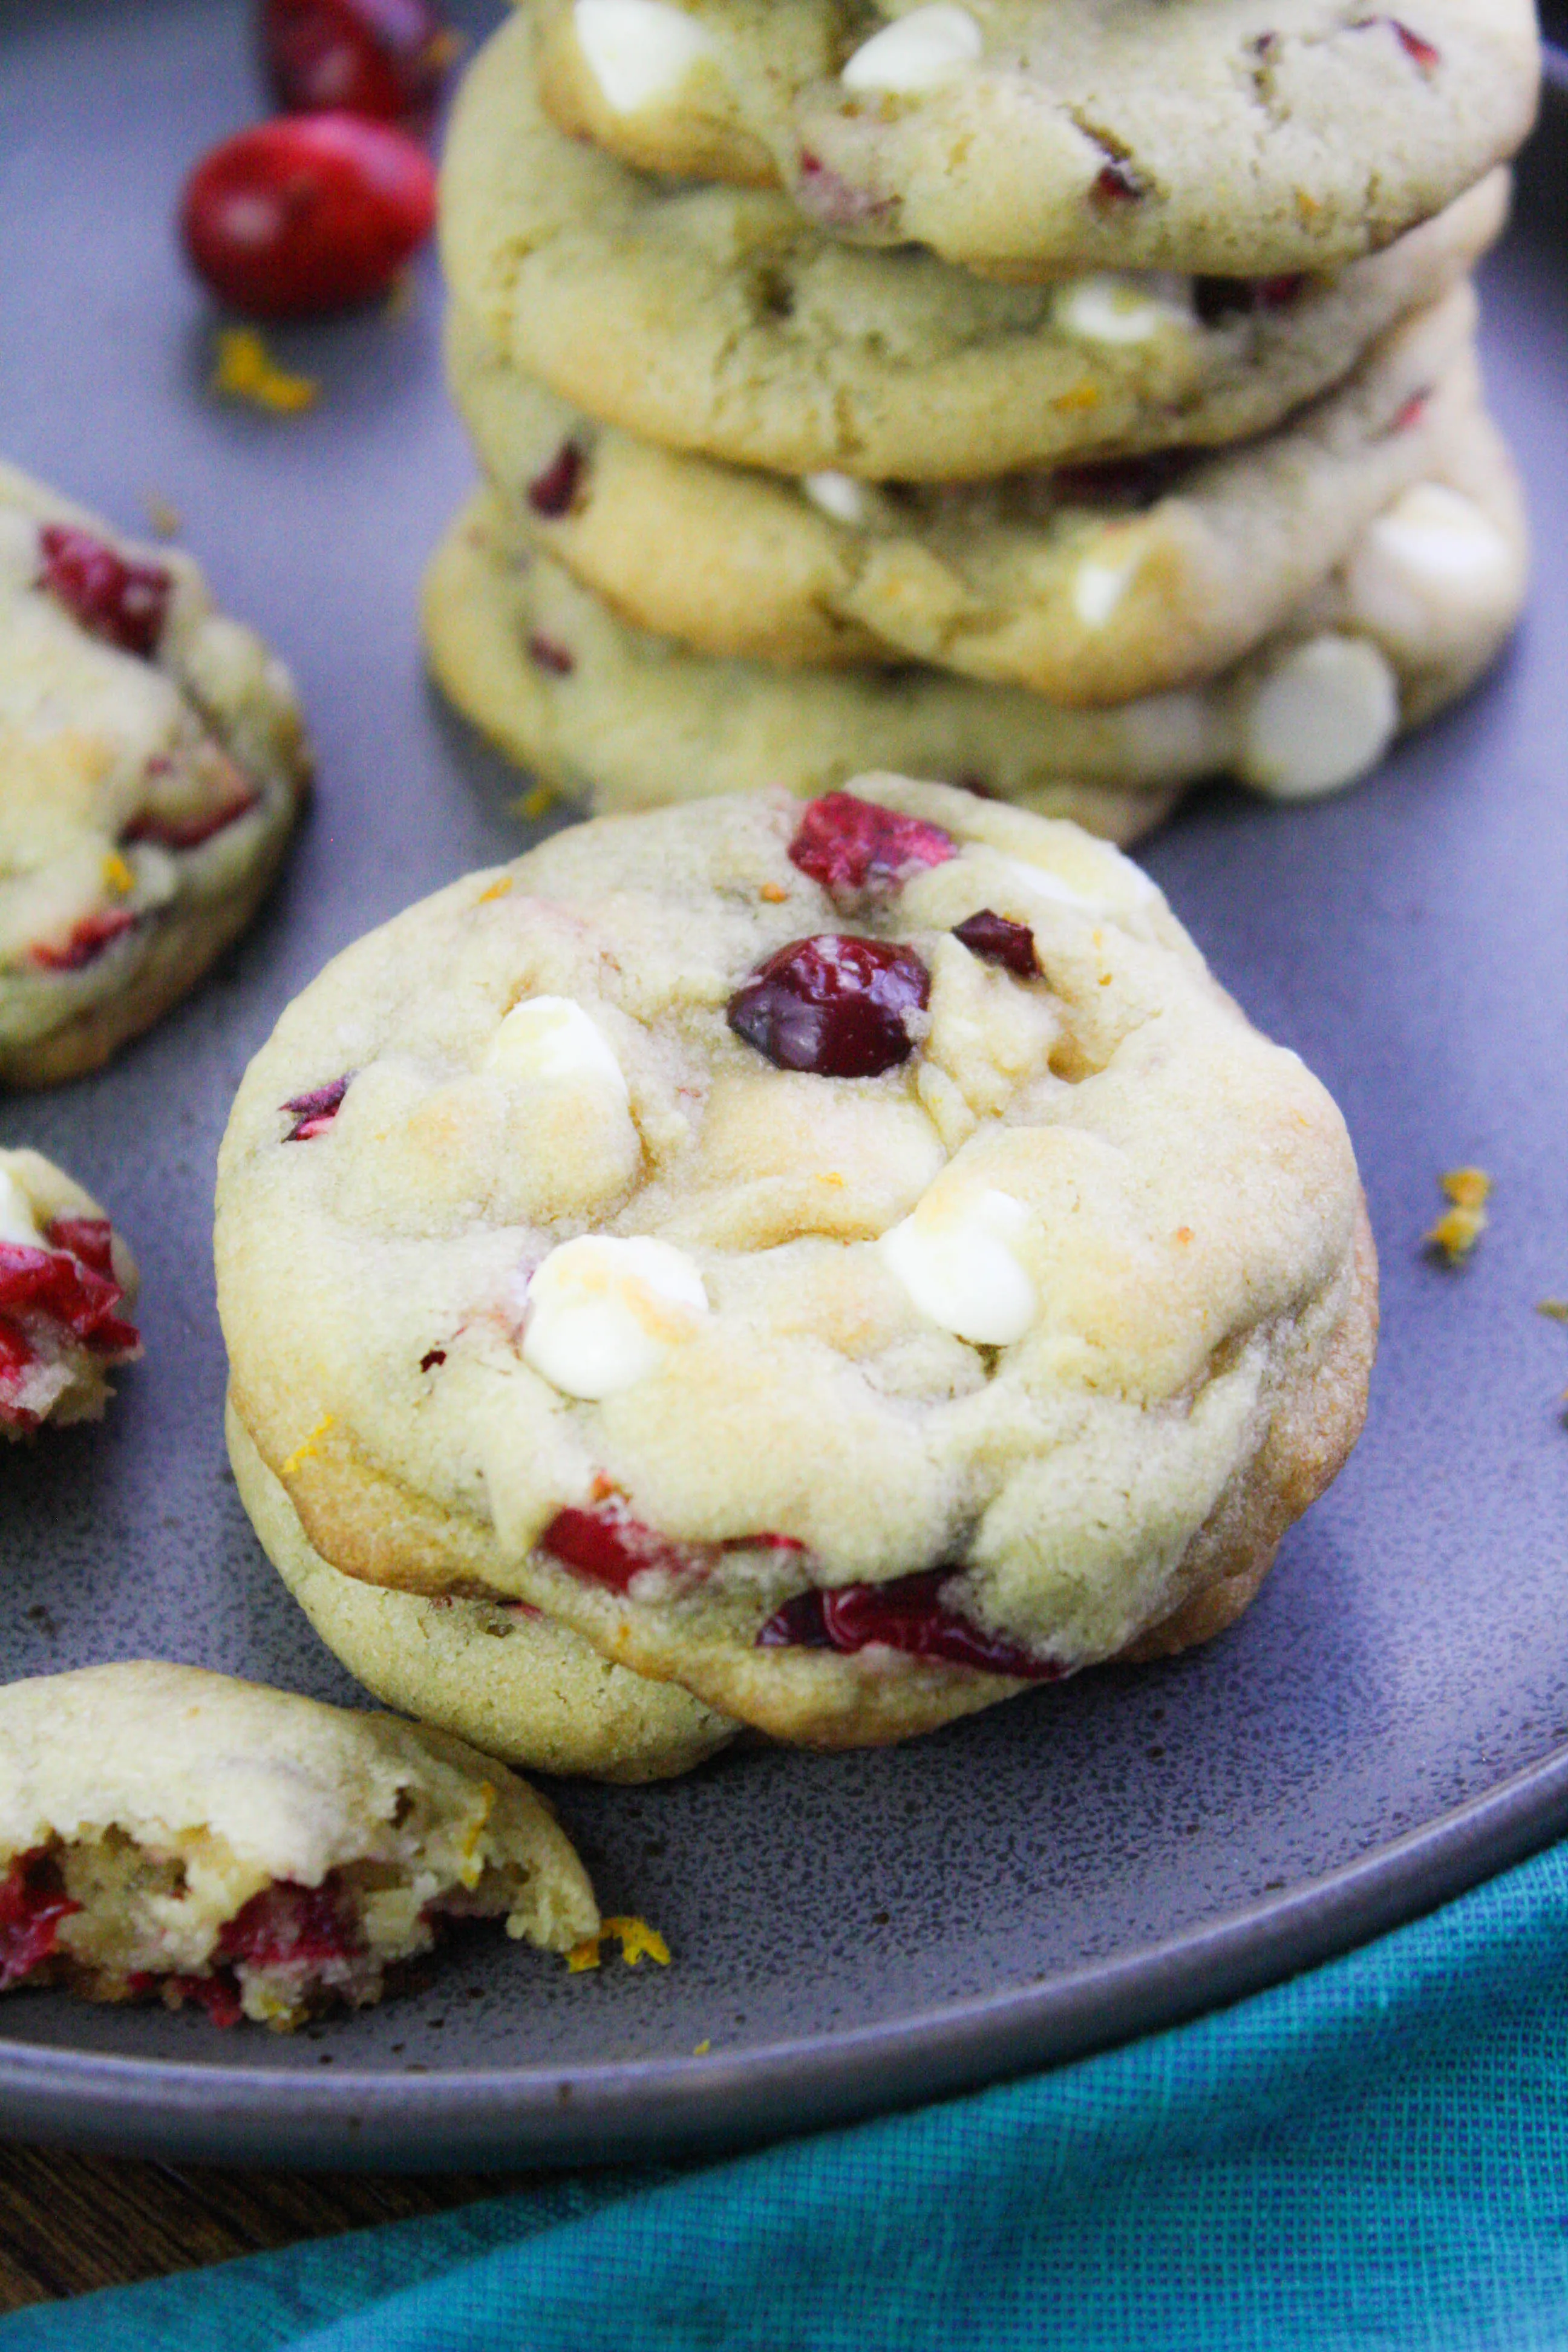 Cranberry-Orange White Chocolate Chip Cookies are perfect for the Christmas tray. Make these Cranberry-Orange White Chocolate Chip Cookies soon!